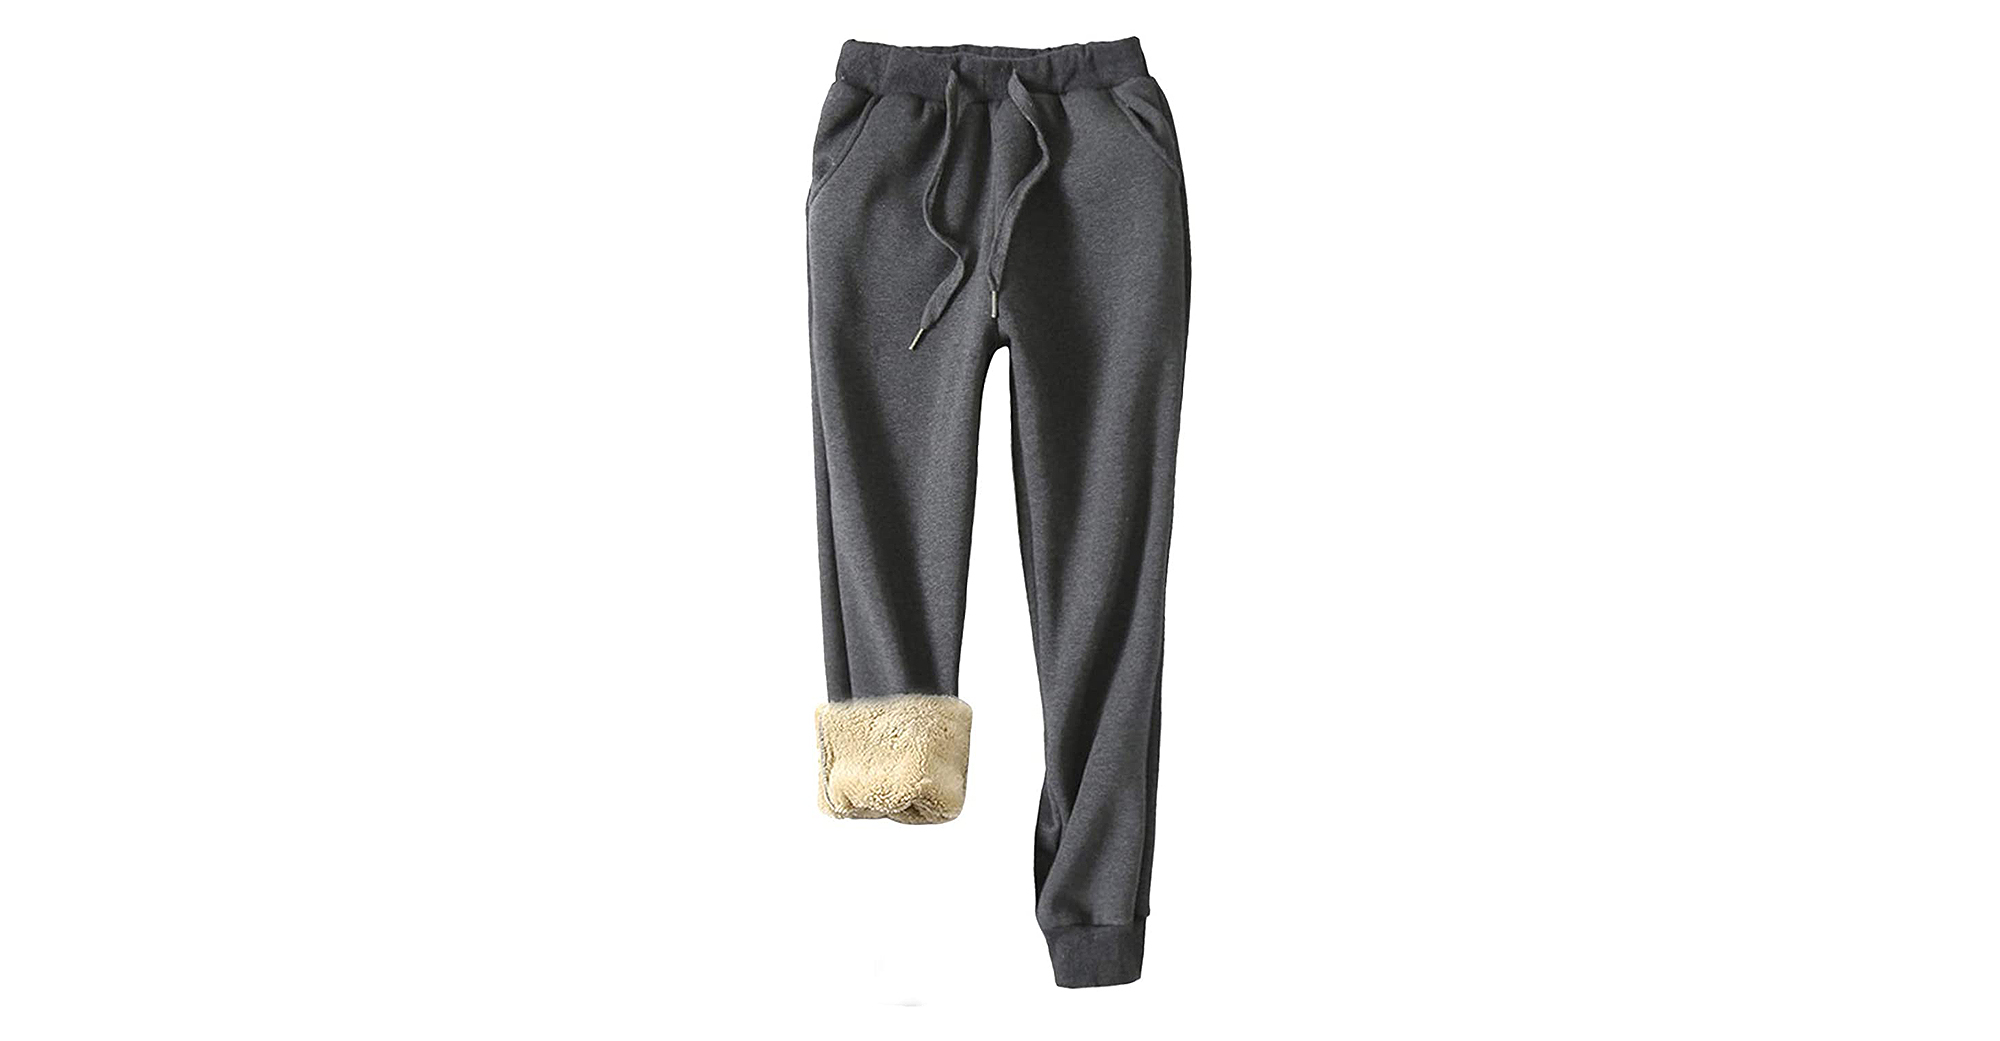 Yeokou Mens Thicken Sherpa Lined Athletic Thermal Jogger Fleece Sweatpants Pants 